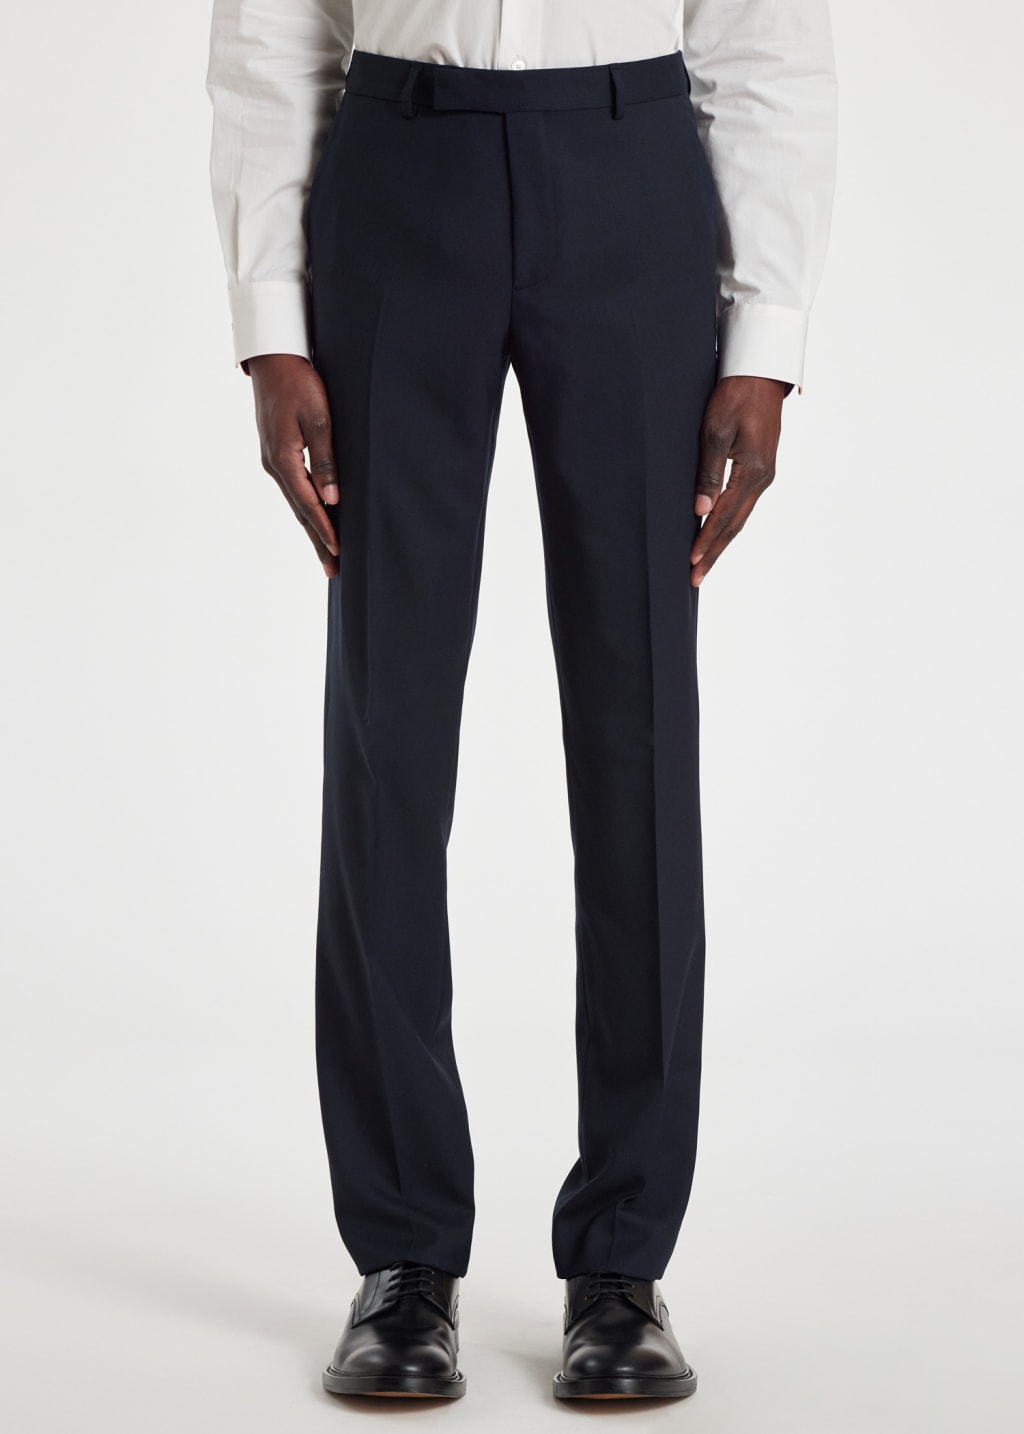 Model View - The Soho - Tailored-Fit Navy Wool 'A Suit To Travel In' Paul Smith